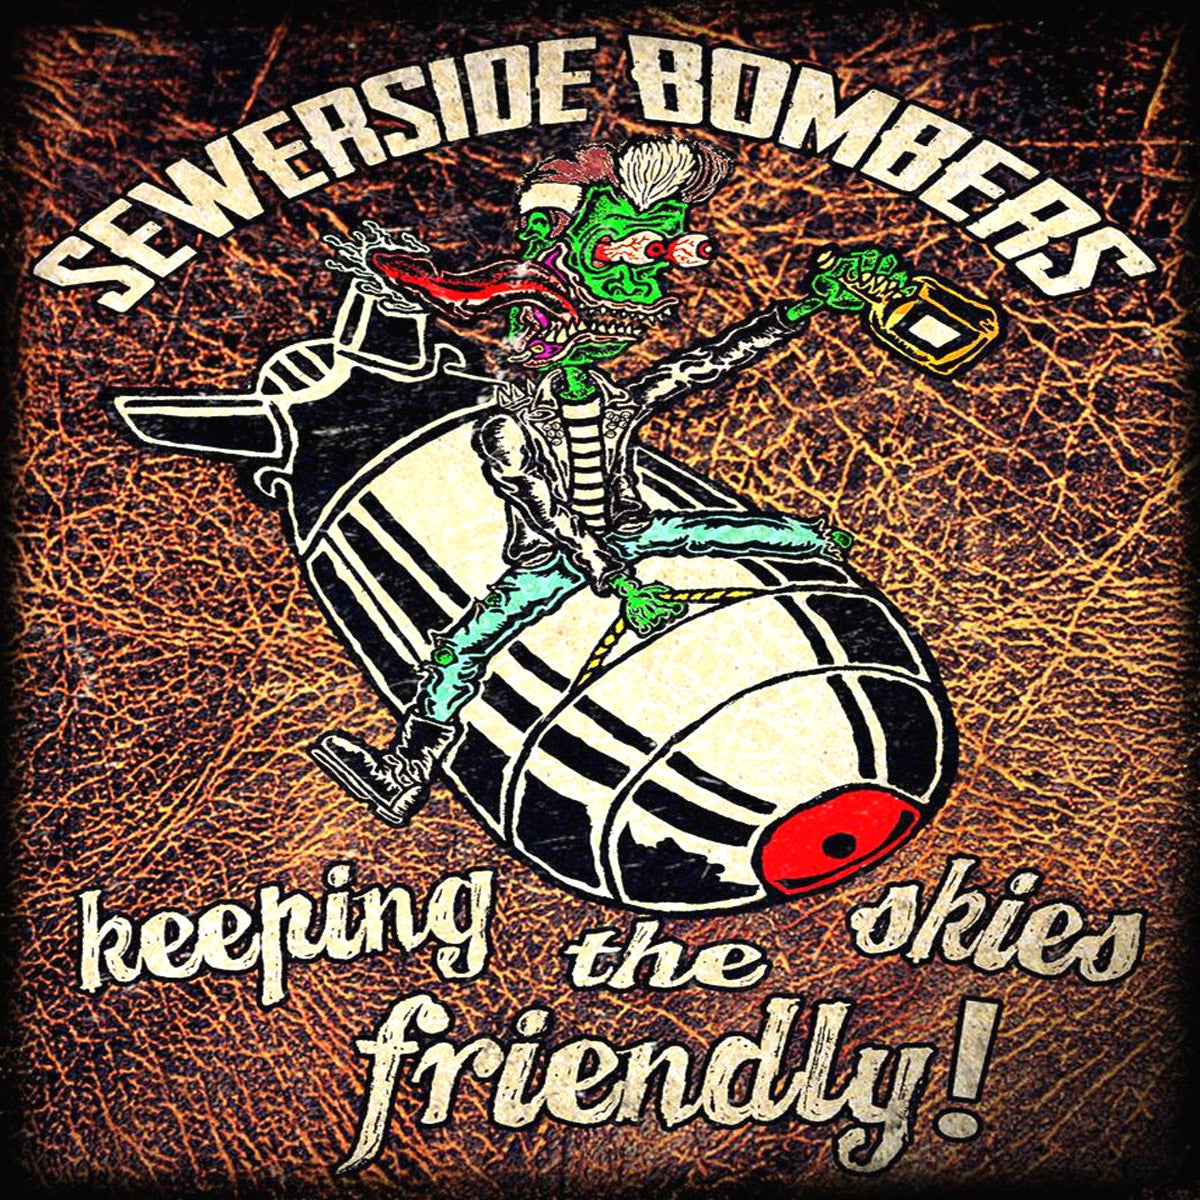 Sewerside Bombers- Keeping The Skies Friendly CD ~NASHVILLE PUSSY!